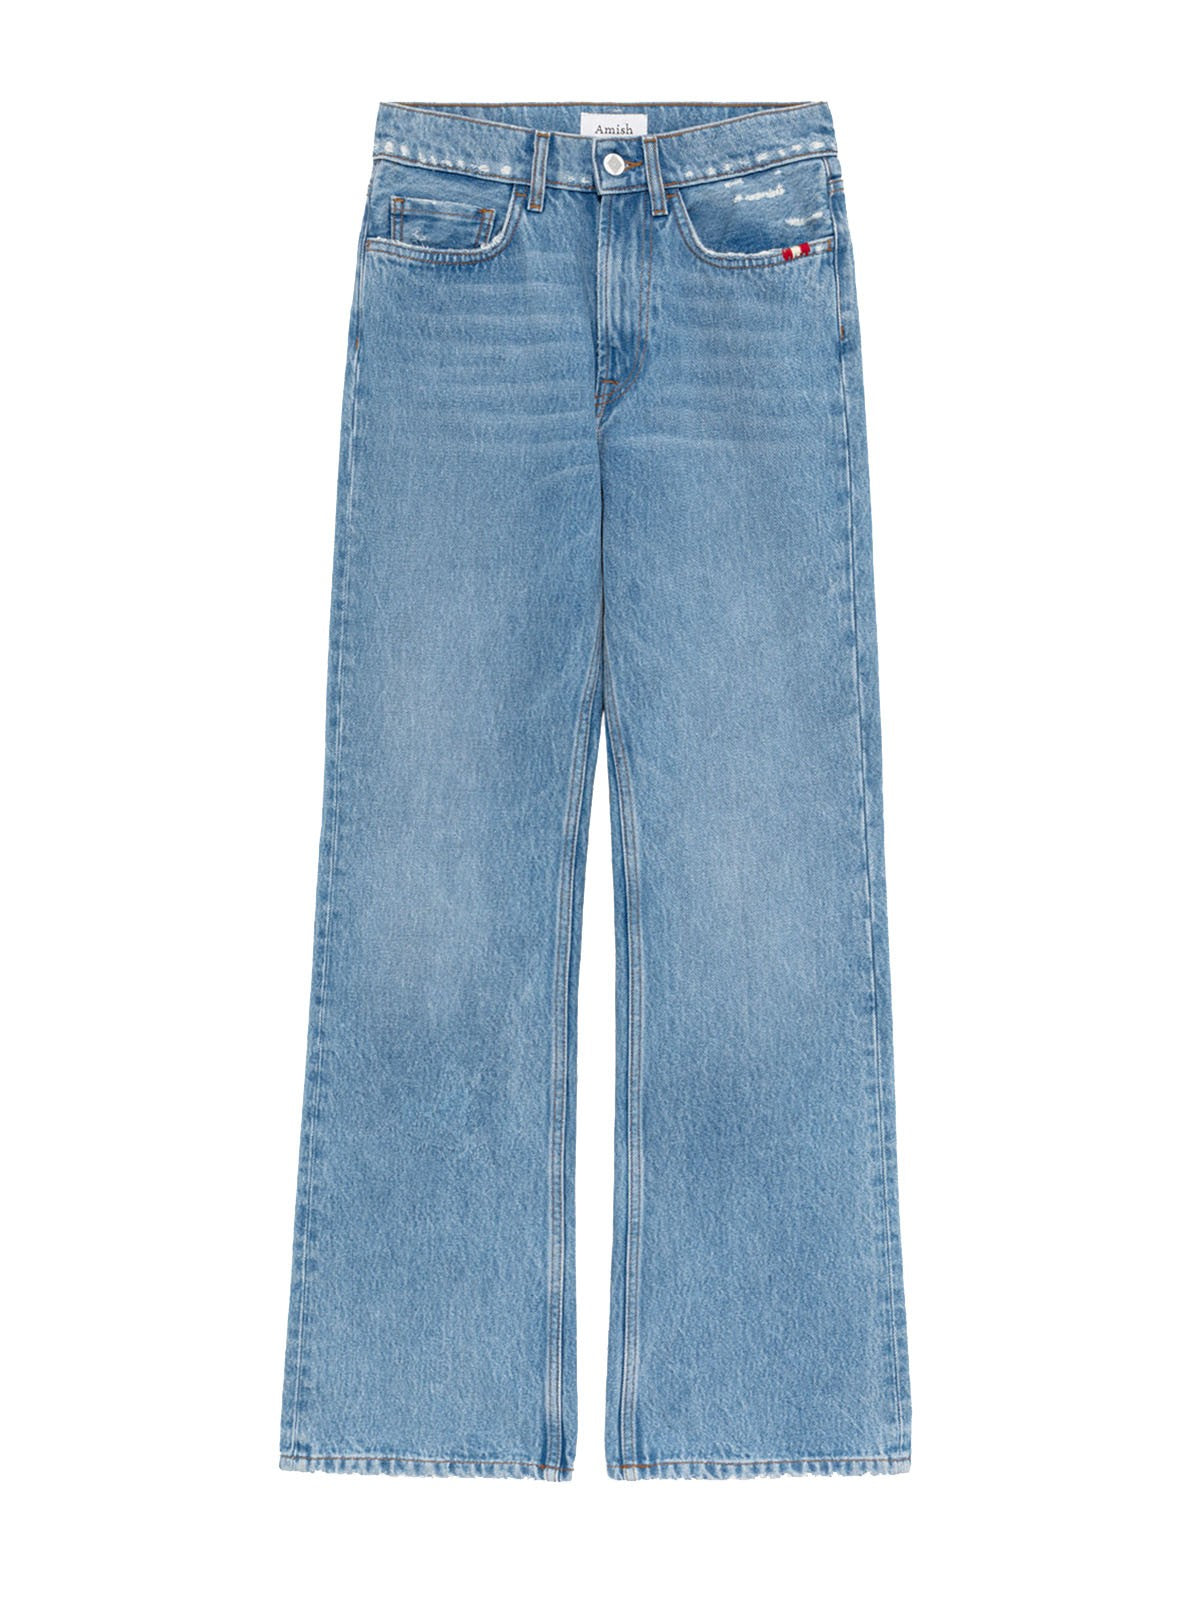 Jeans Donna Amish - Jeans Kendall Summertime - Blu